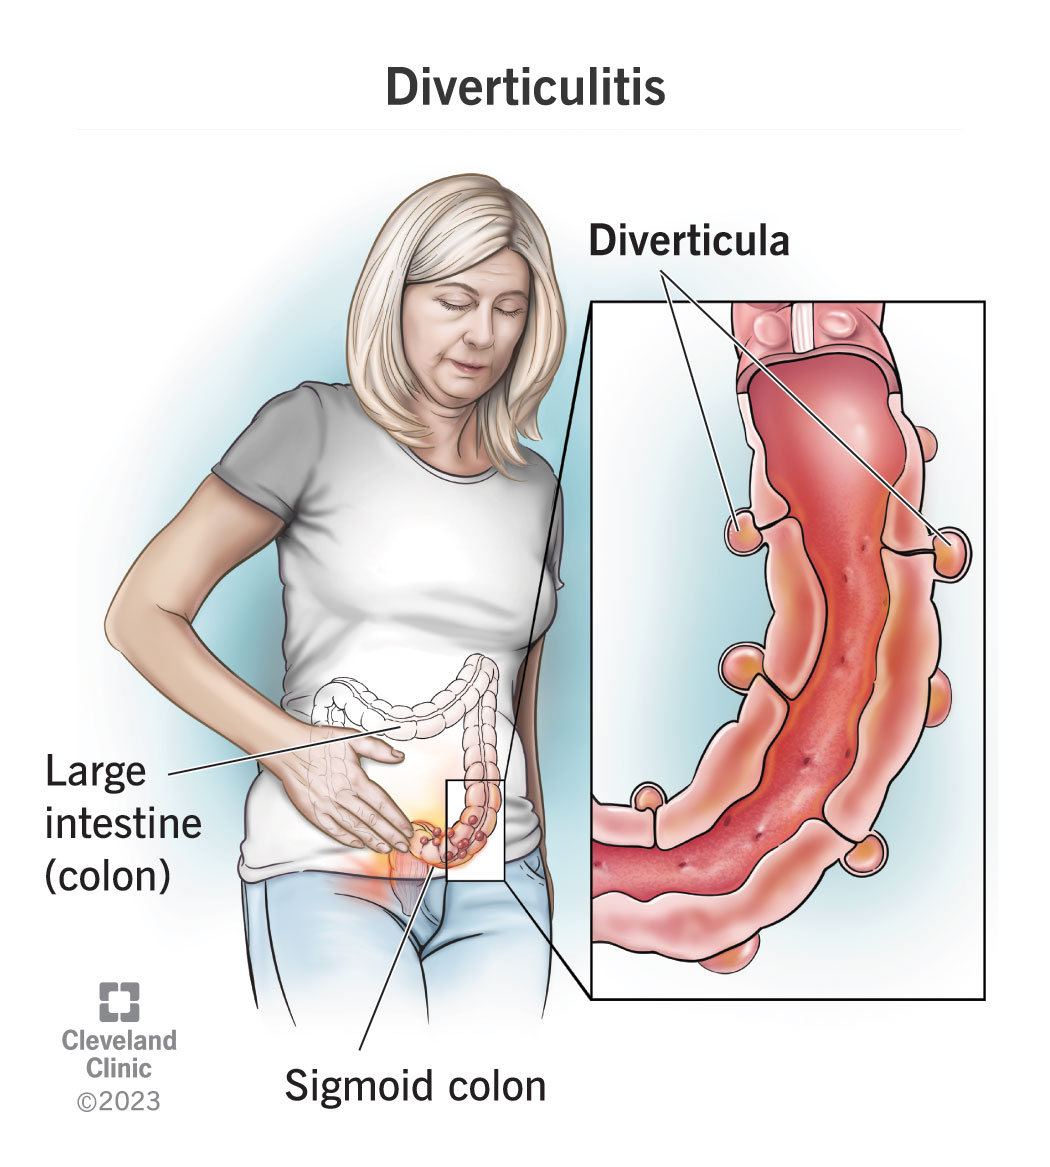 Diverticula, tiny pockets in the lining of your colon, can become infected and inflamed (diverticulitis).